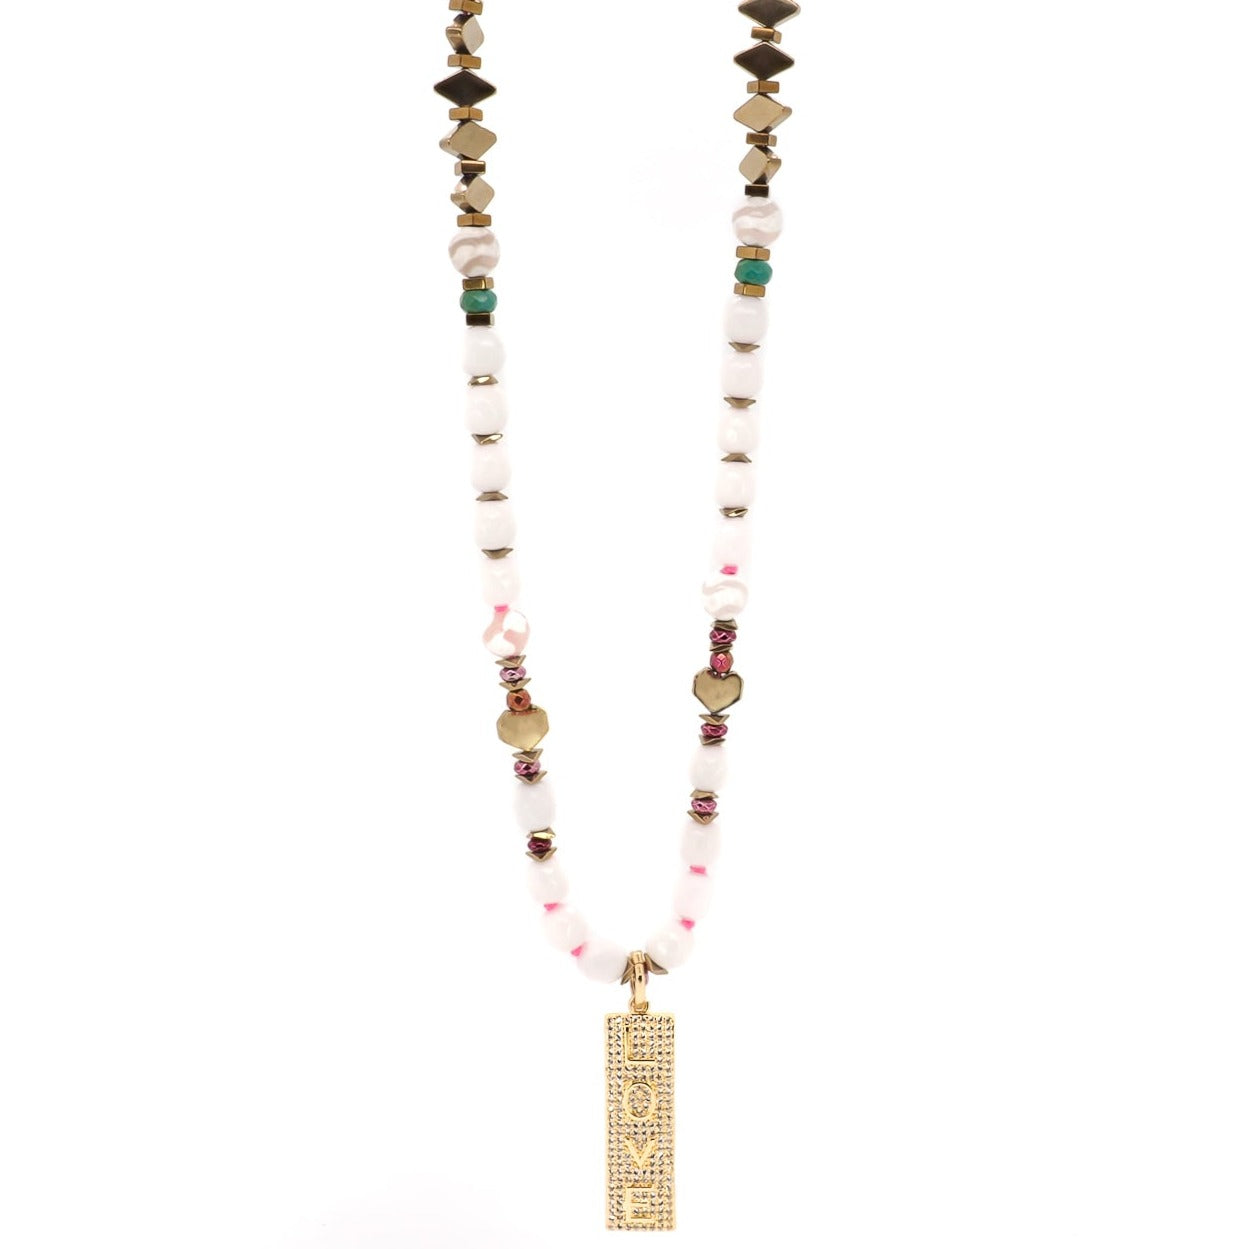 The 18K gold-plated pink enamel tube evil eye bead on the Power Of Love Necklace, symbolizing protection and warding off negative energies, creating a beautiful contrast with the other beads.